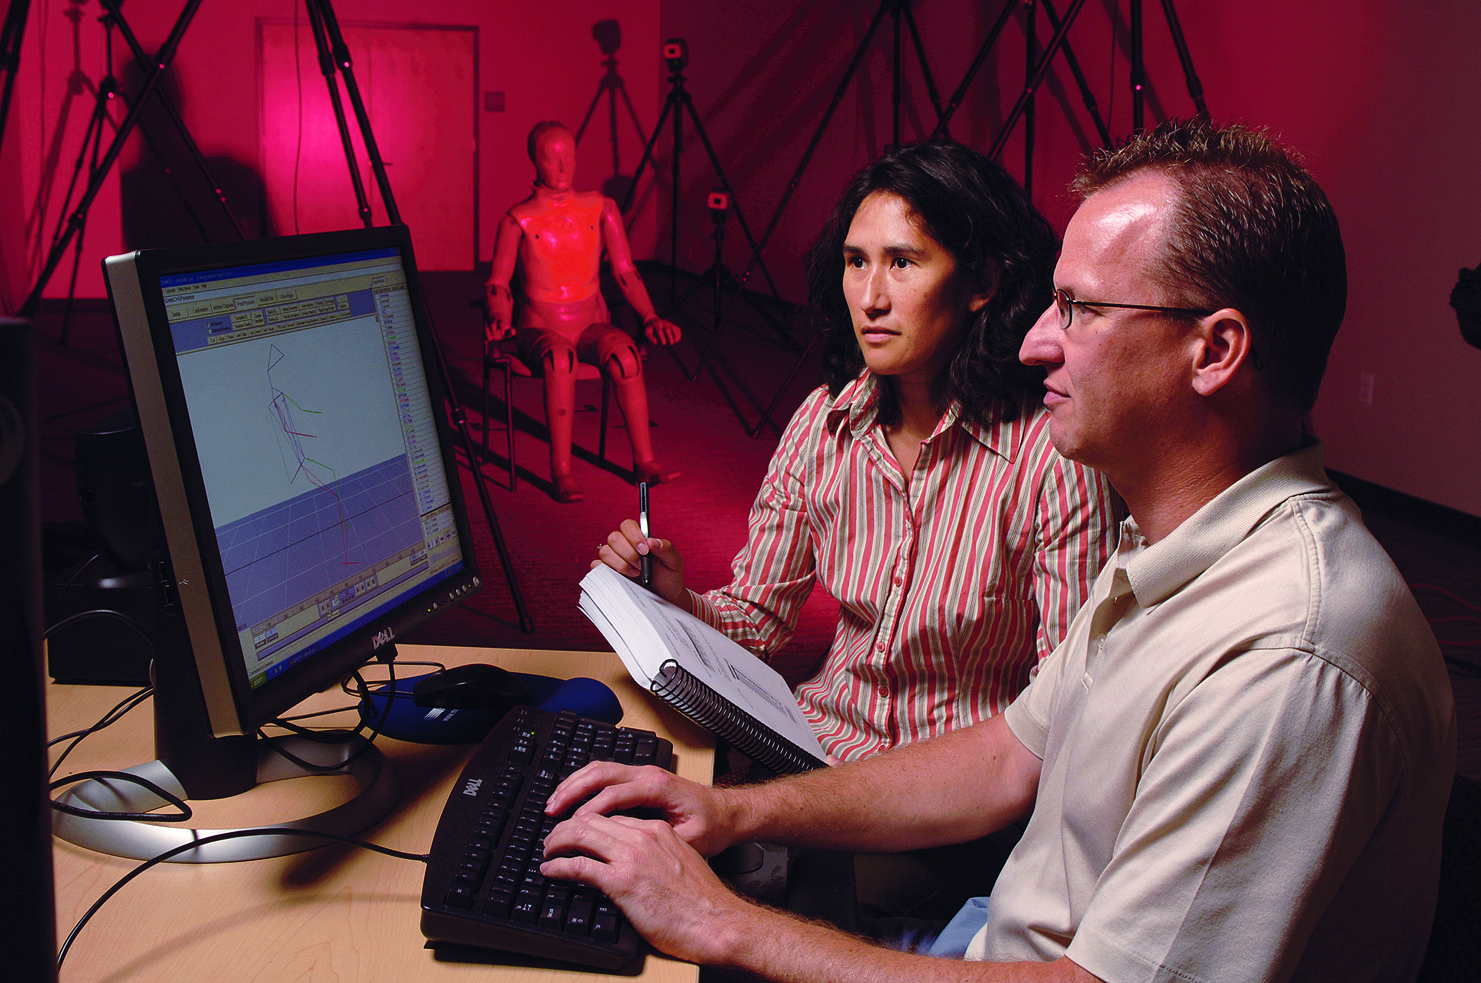 A man sits at a computer while a woman takes notes of what is on the screen